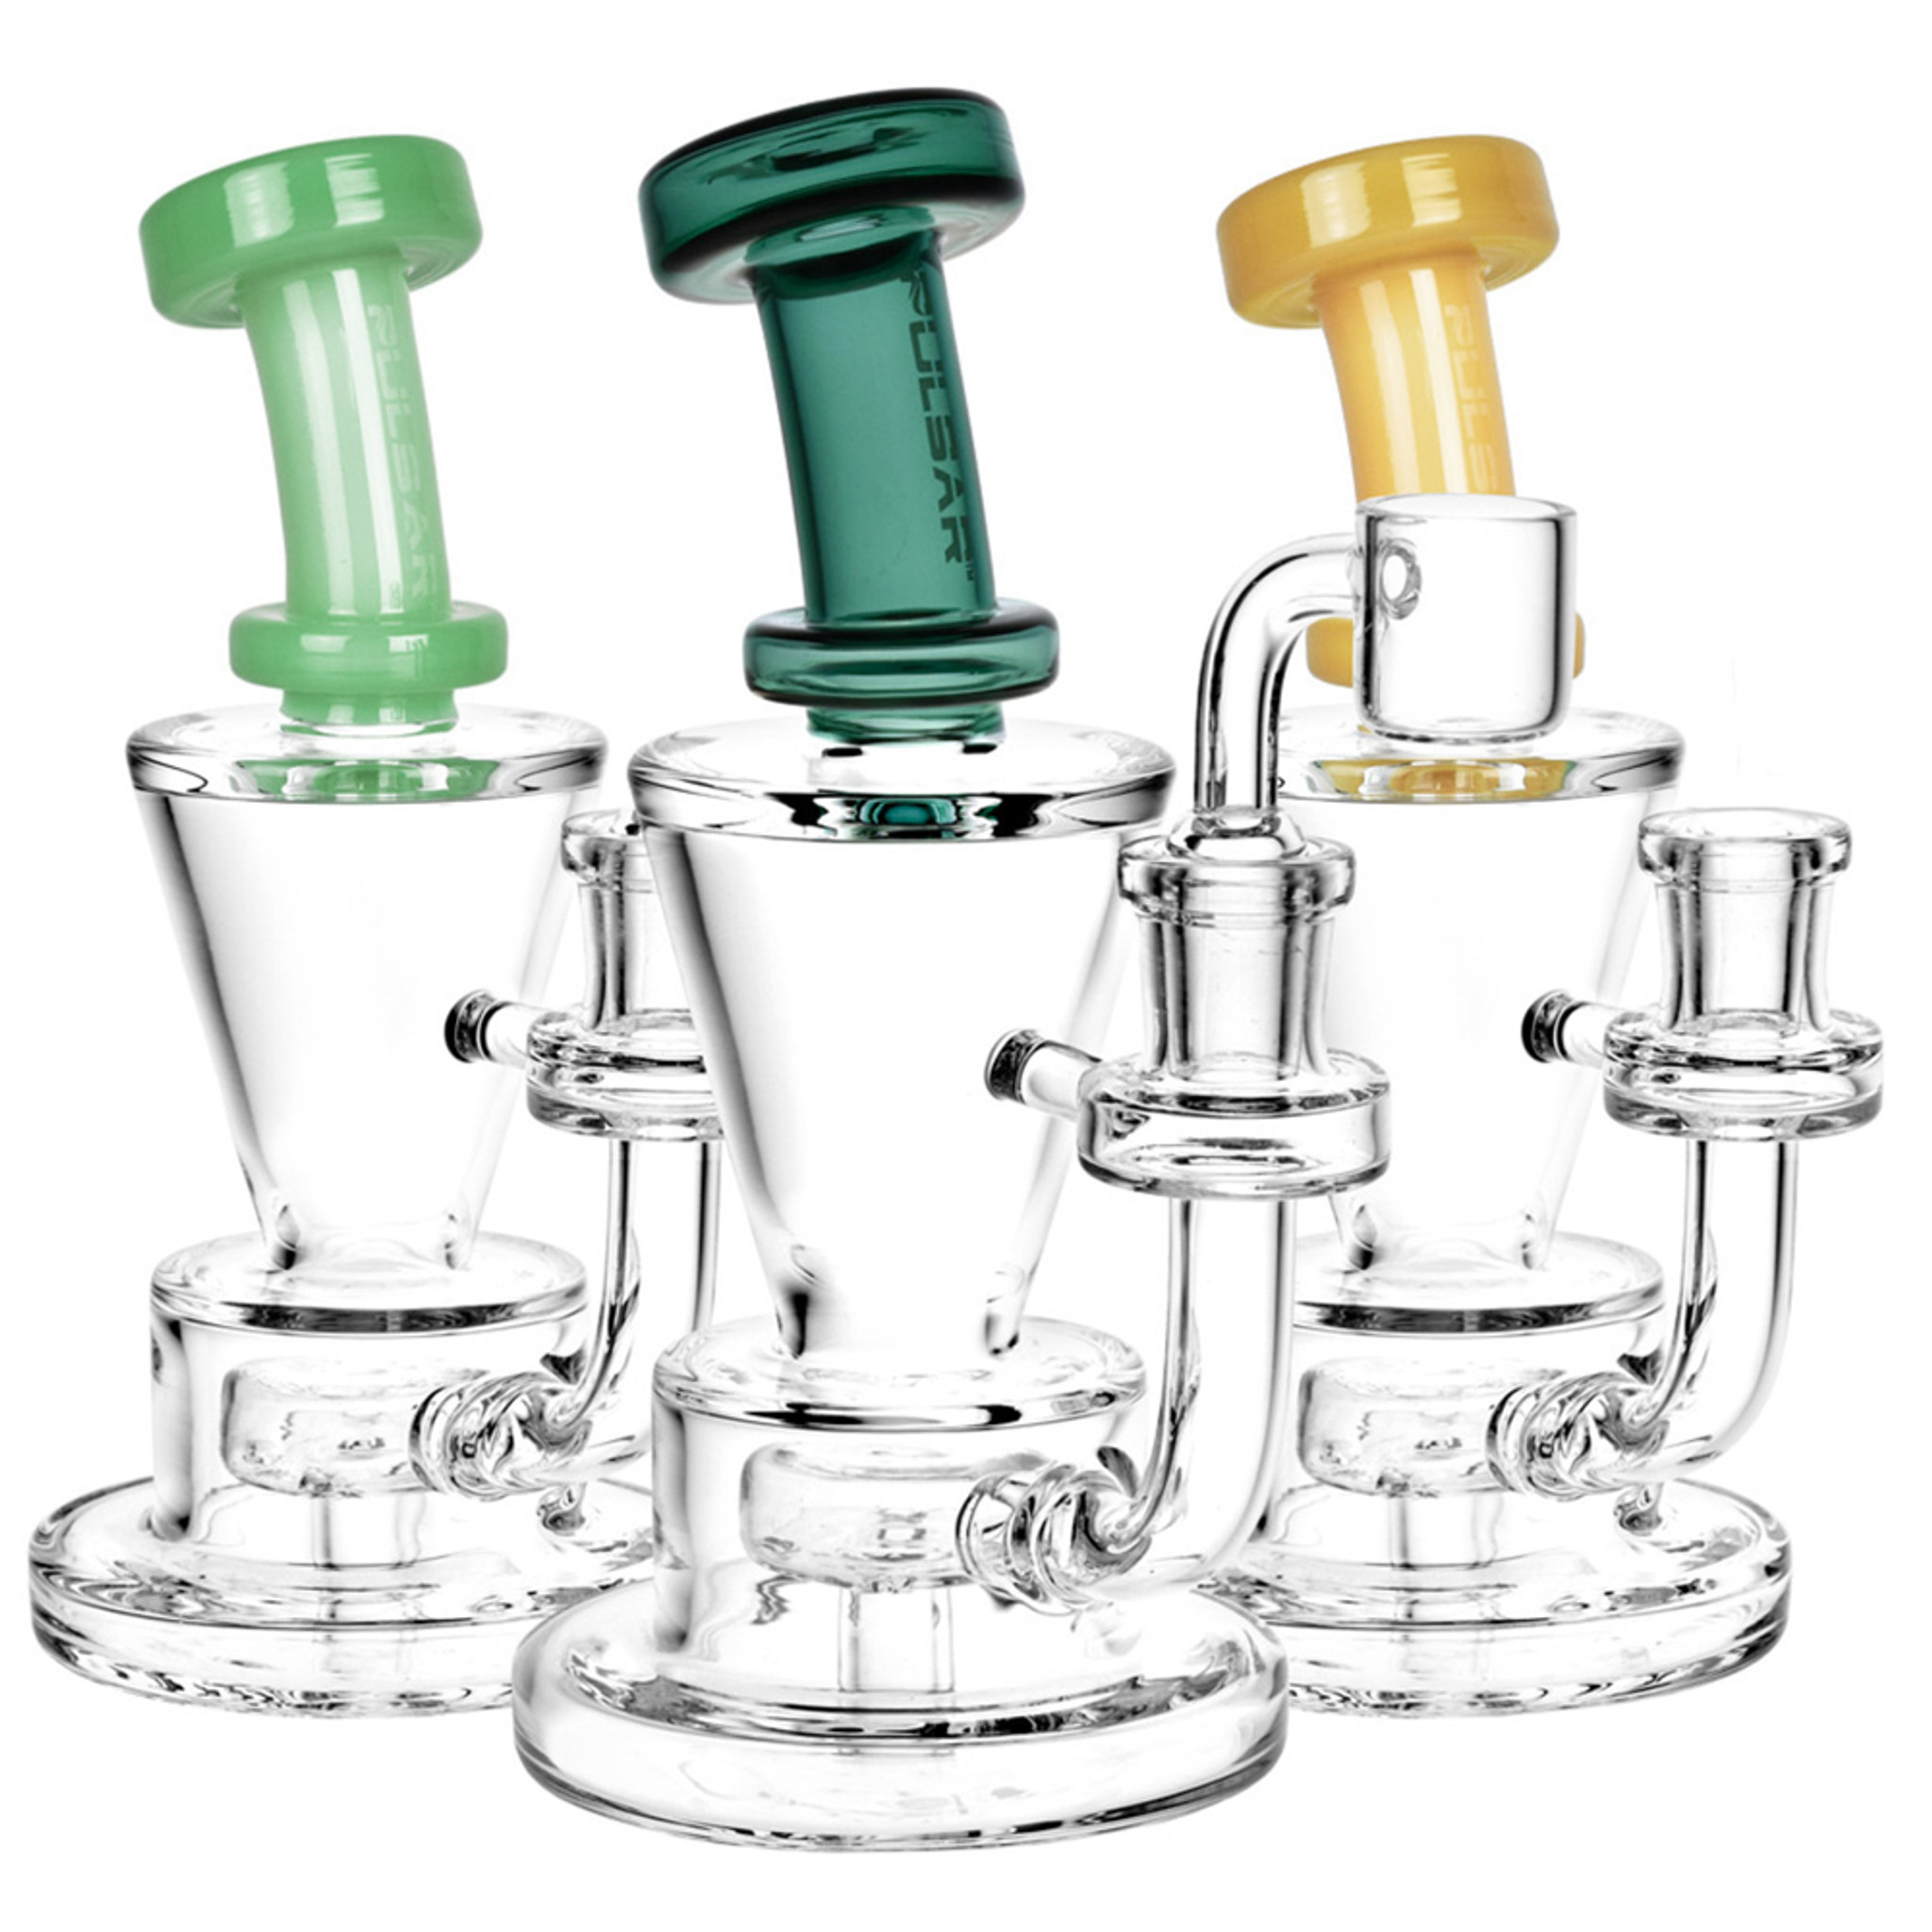 Pulsar - 6.5 Funnel Dab Rig with Colour Accents